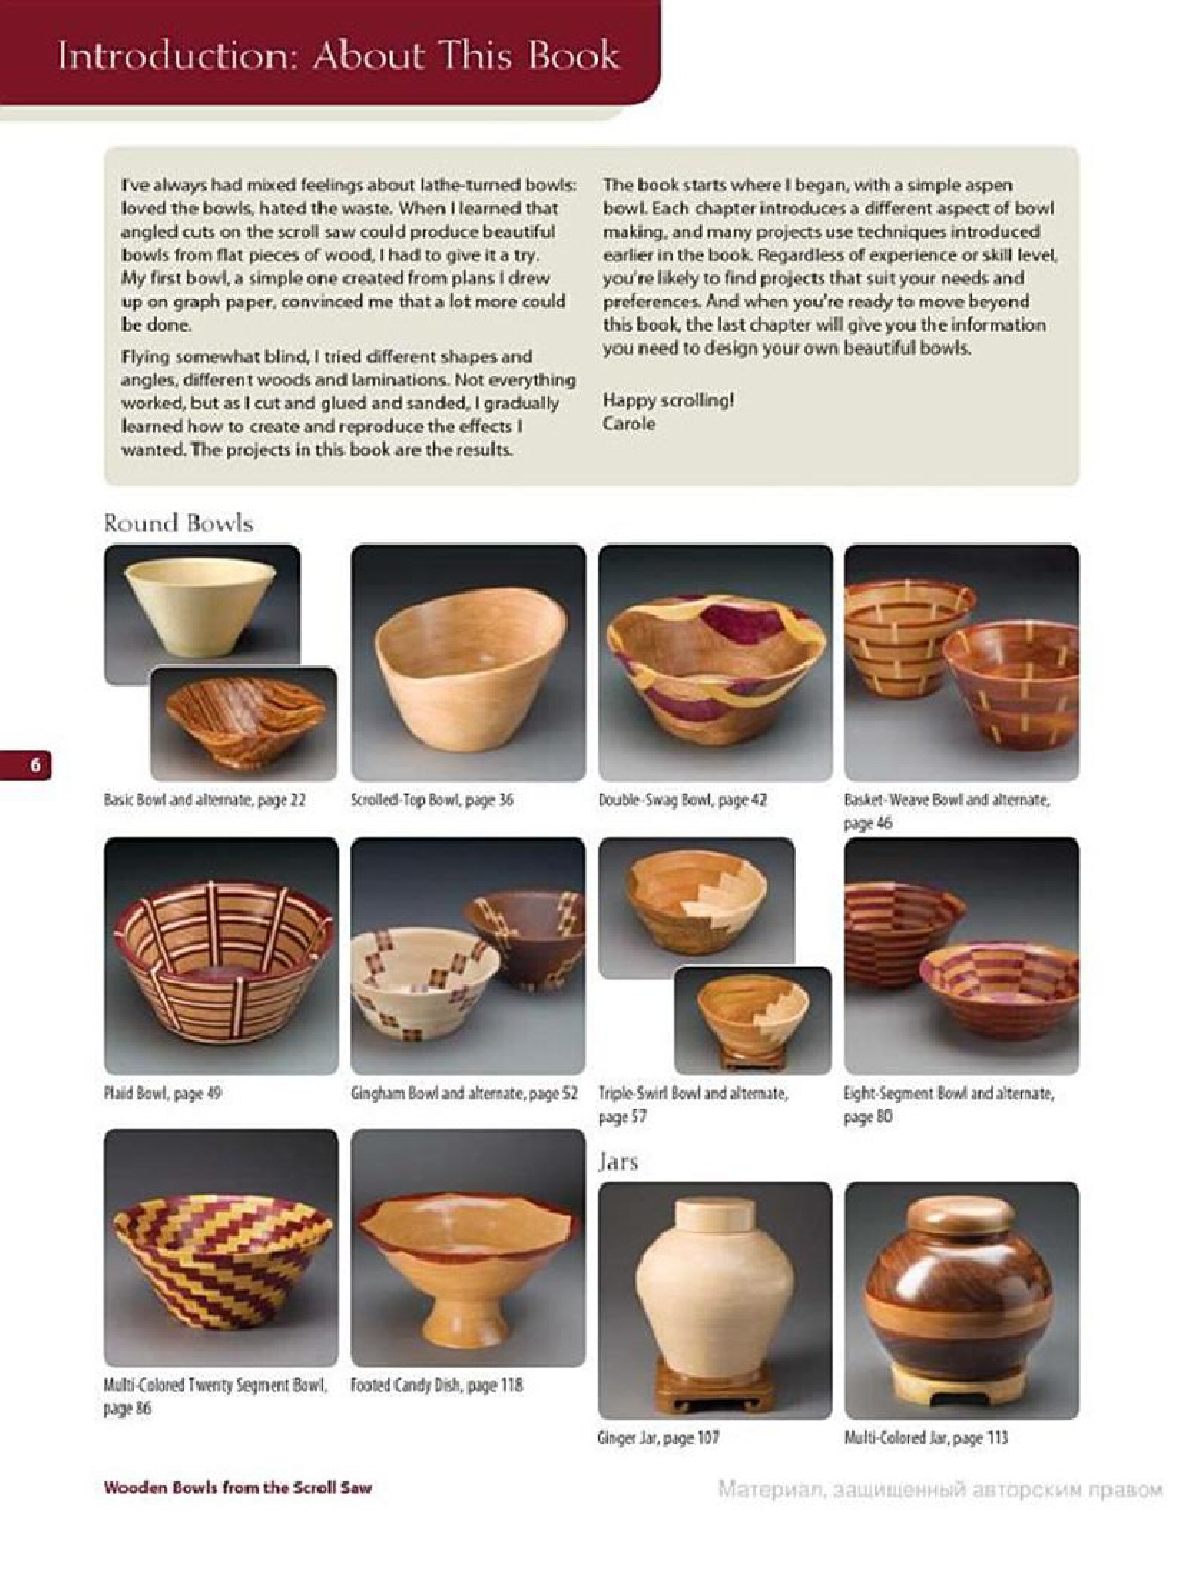 Wooden Bowls from the Scroll Saw-28 Useful & Surprisingly Easy-to-Make Projects